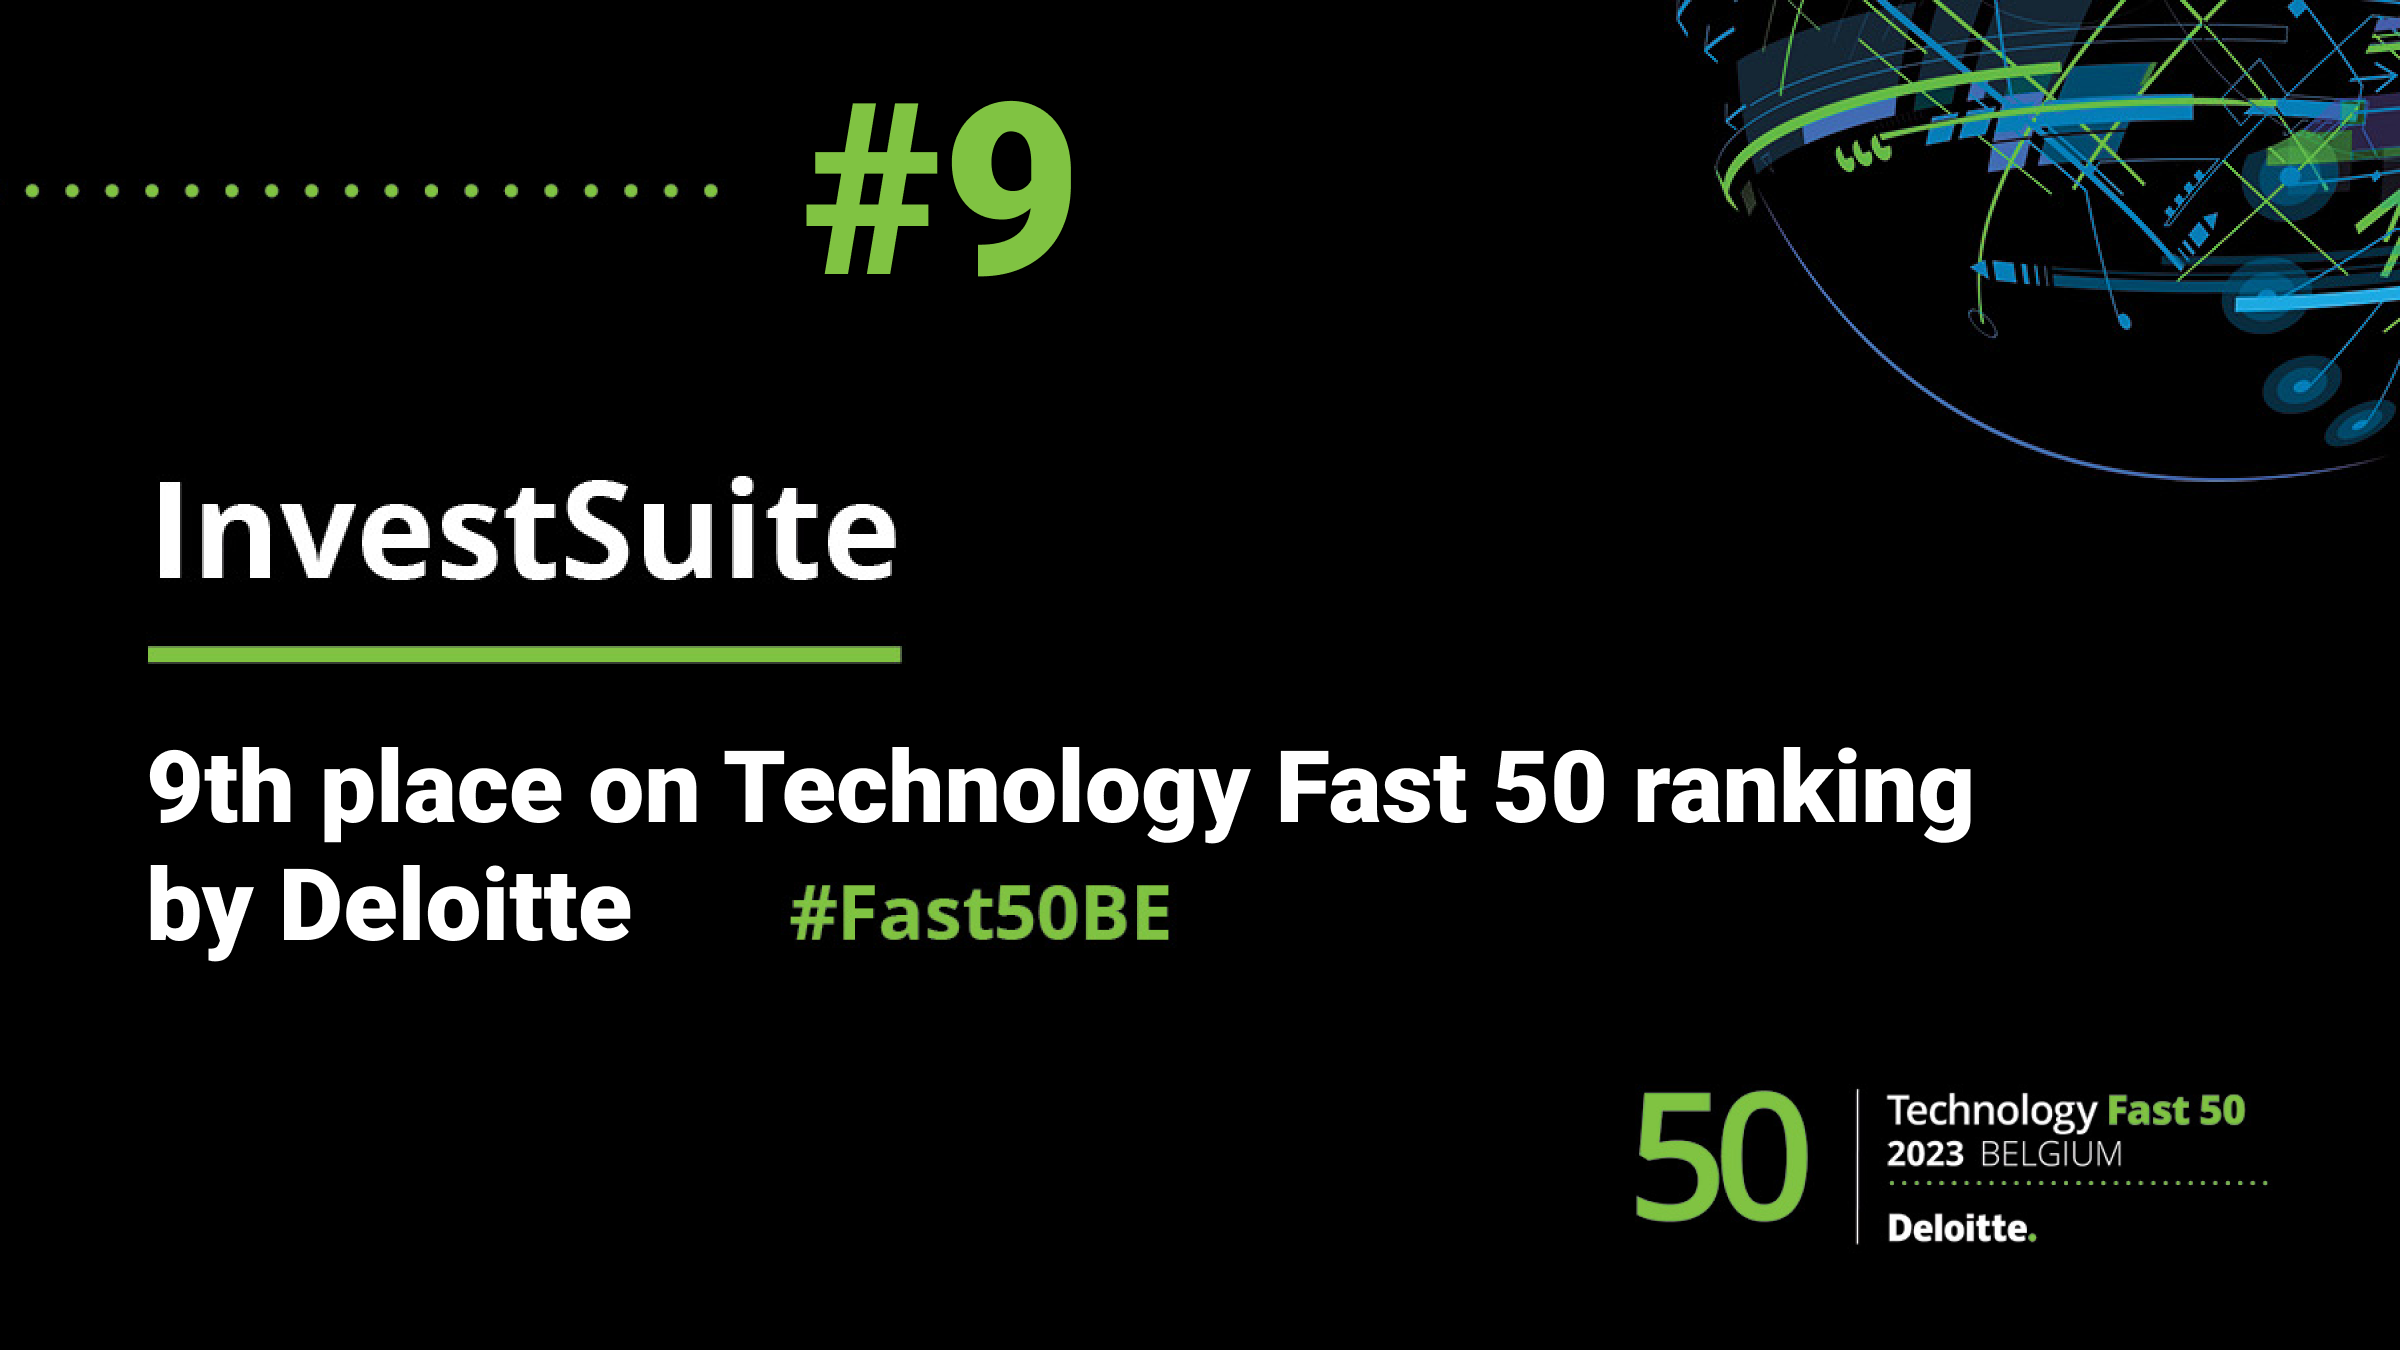 InvestSuite ranks 9th on Deloitte's Technology Fast 50